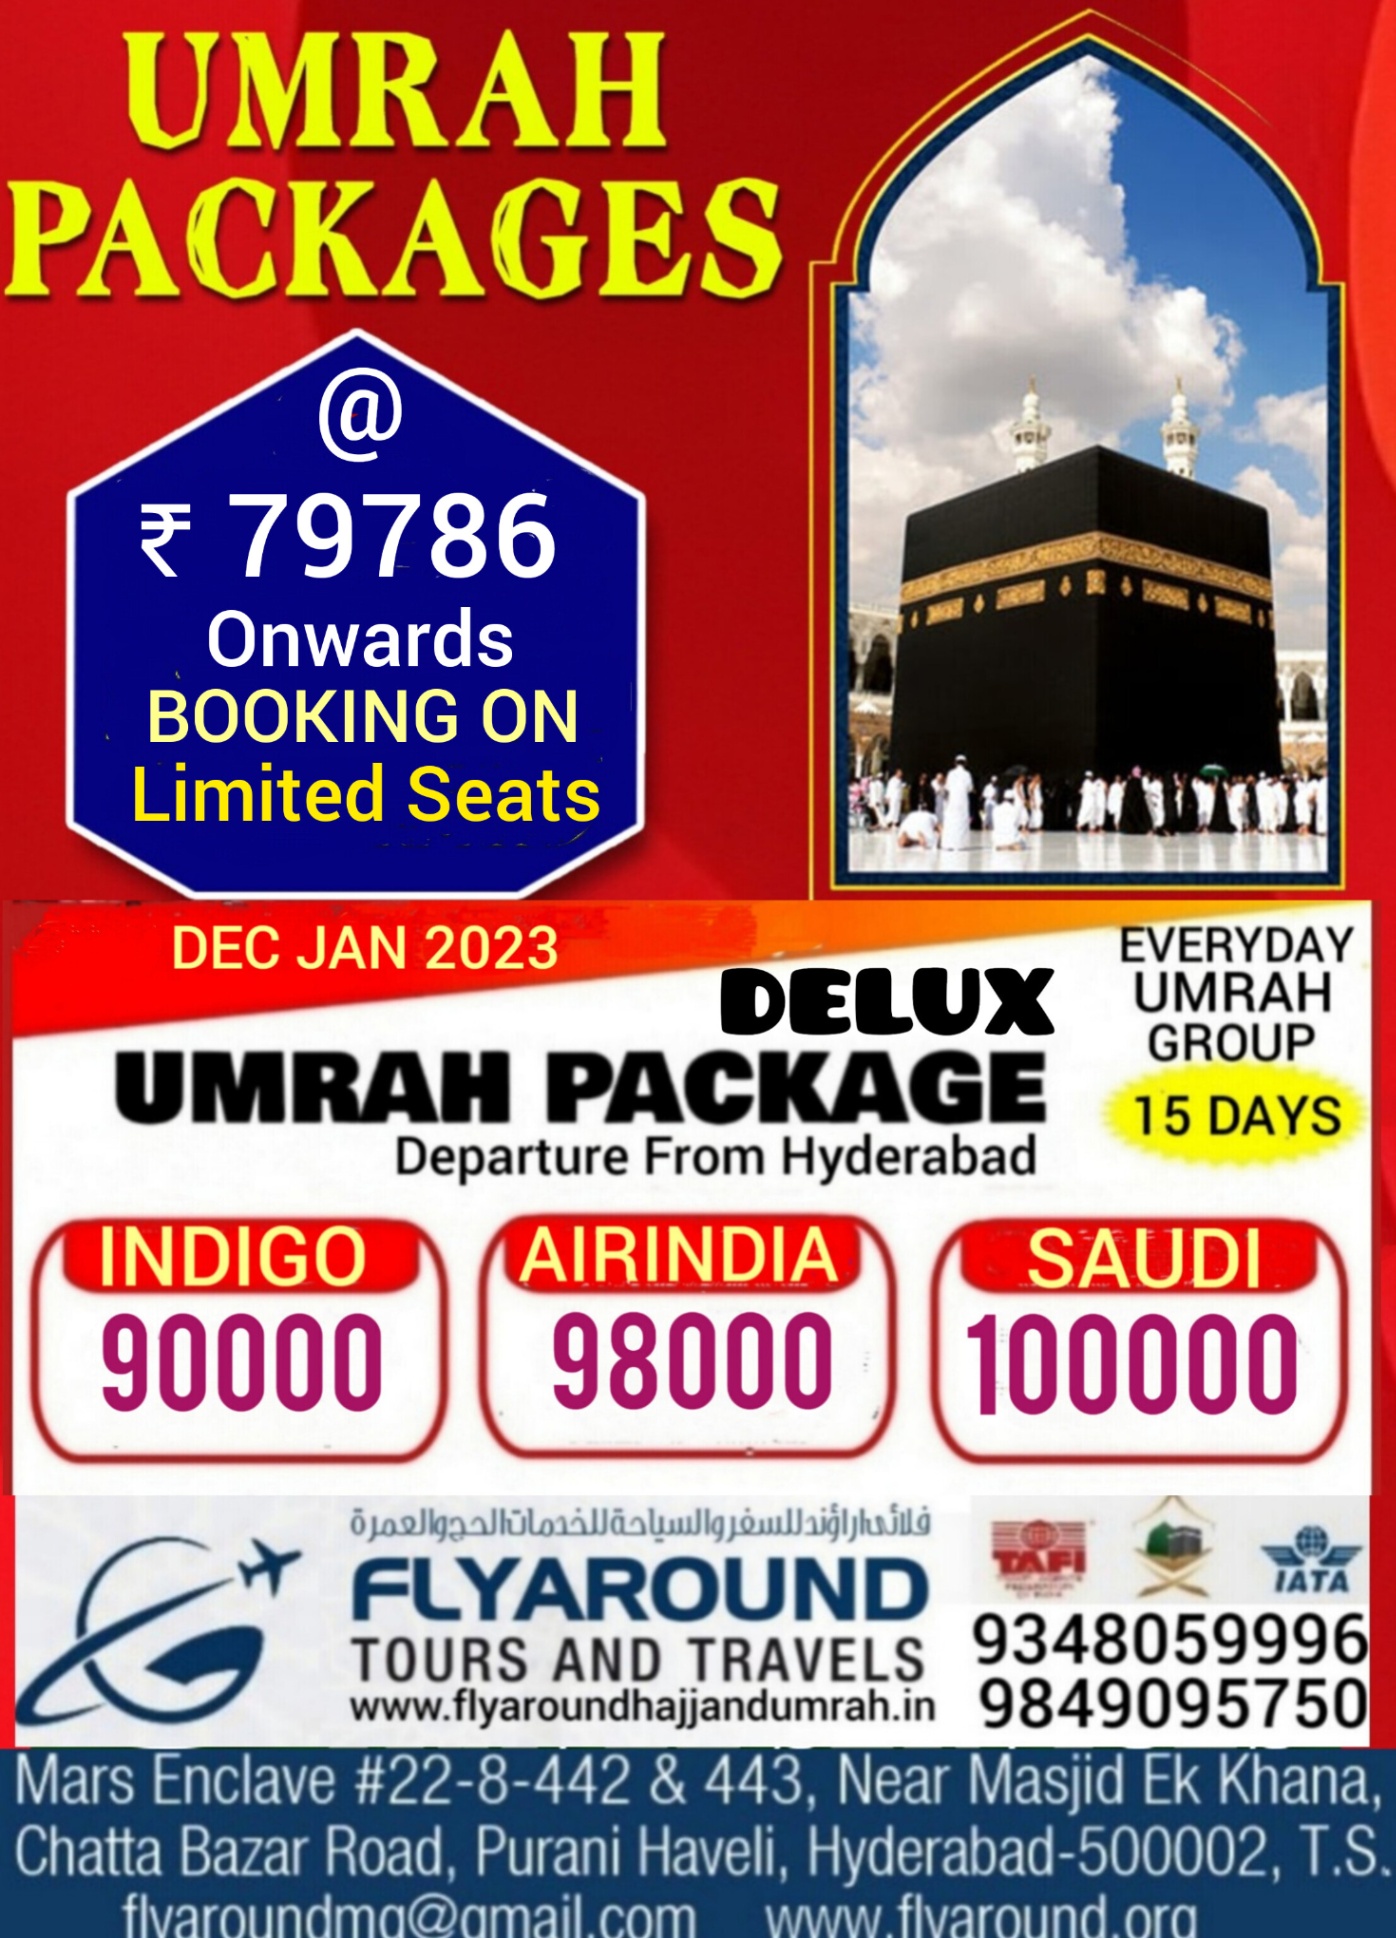 Pilgrimage Tour, Travel agents; Exp: More than 10 year